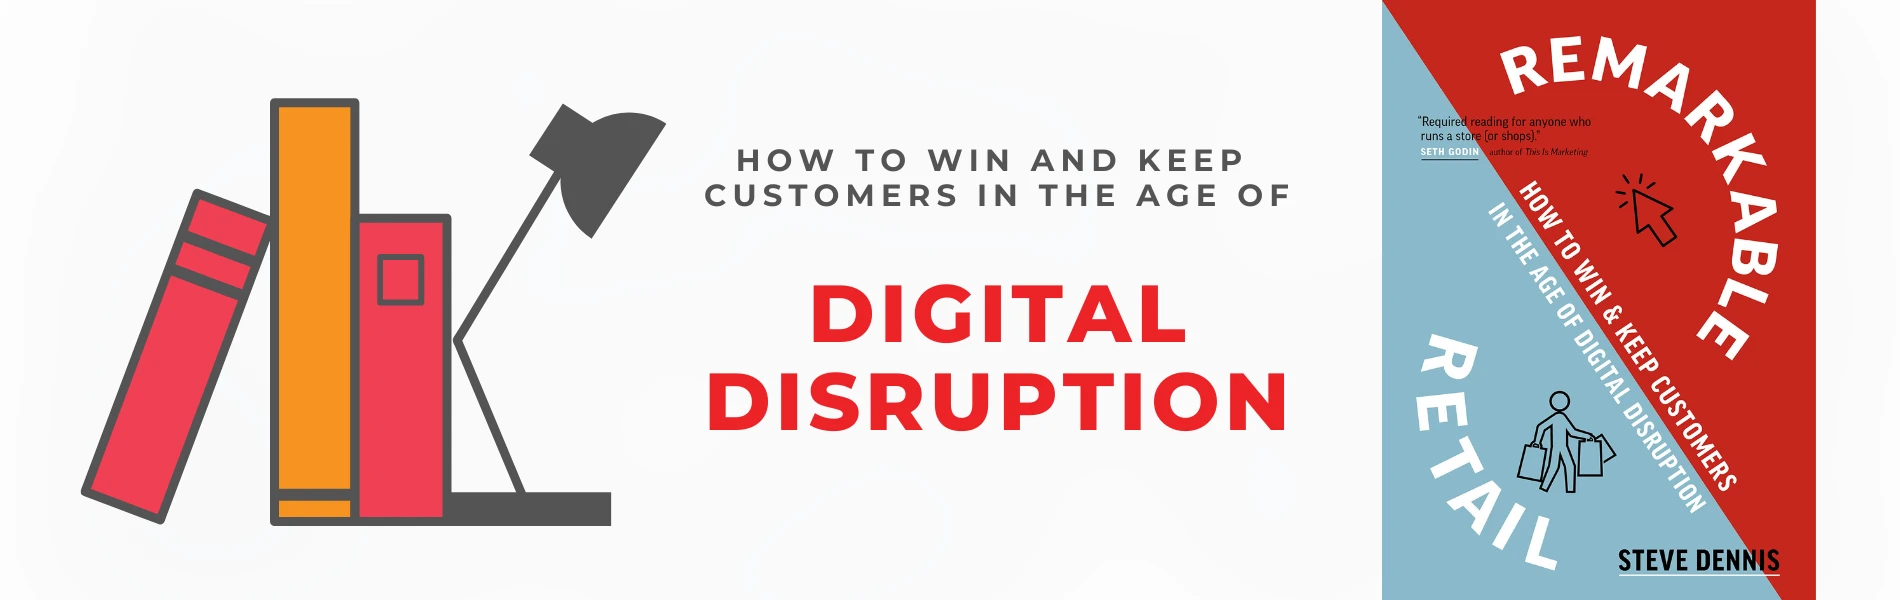 Review of Steve Dennis’ “Remarkable Retail” How To Win & Keep Customers In The Age of Digital Disruption”